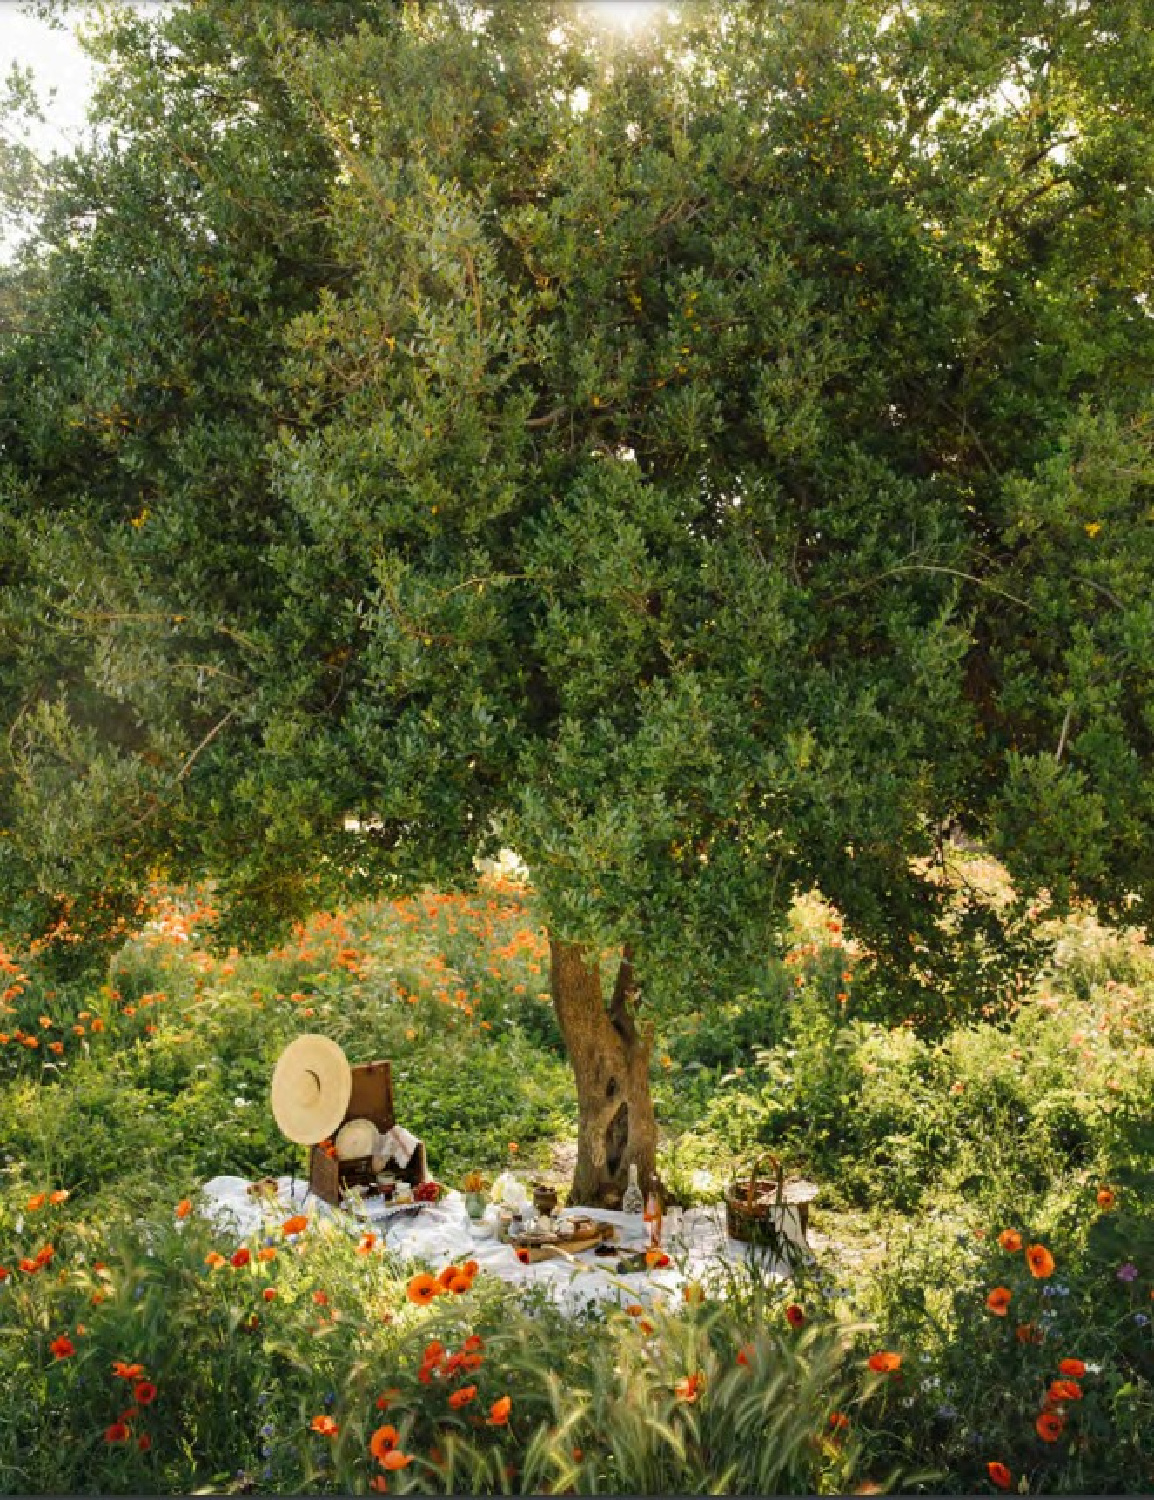 A romantic garden from Provence in THE FLOWERS OF PROVENCE by Jamie Beck. #provencestyle #flowersofprovence #jamiebeck